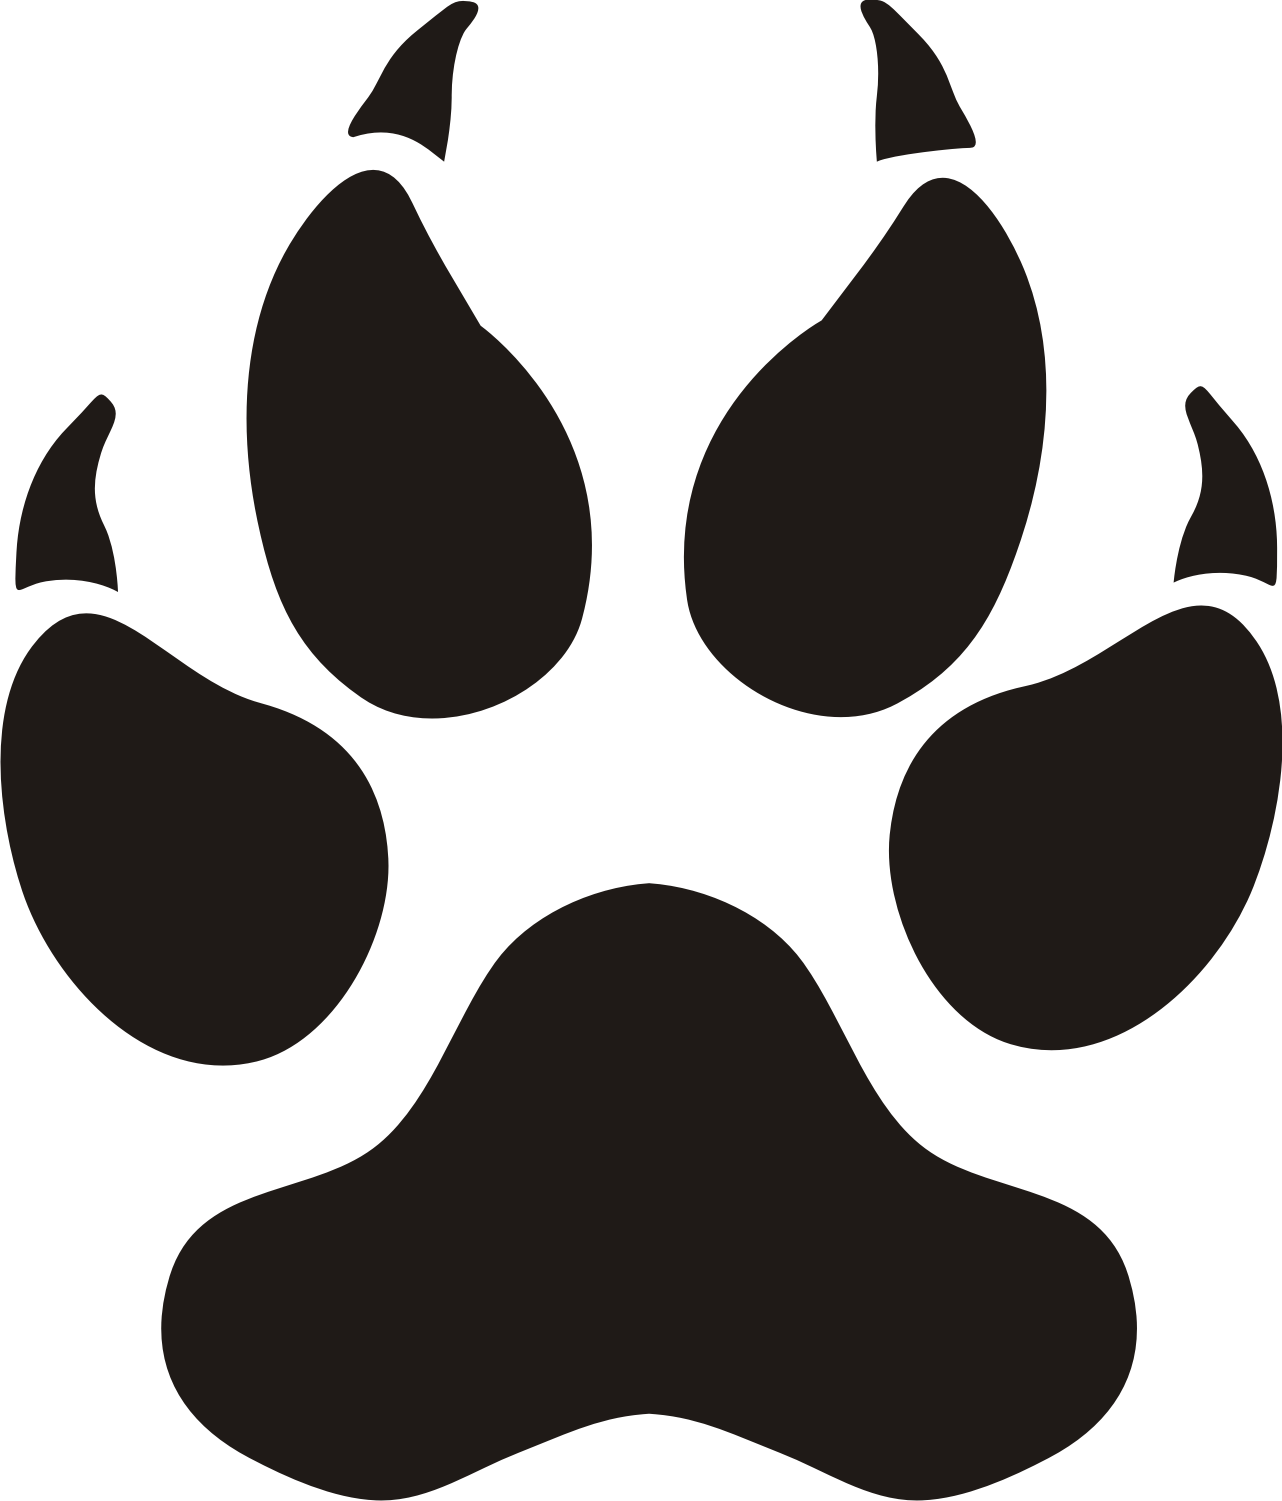 Outline paw print clipart